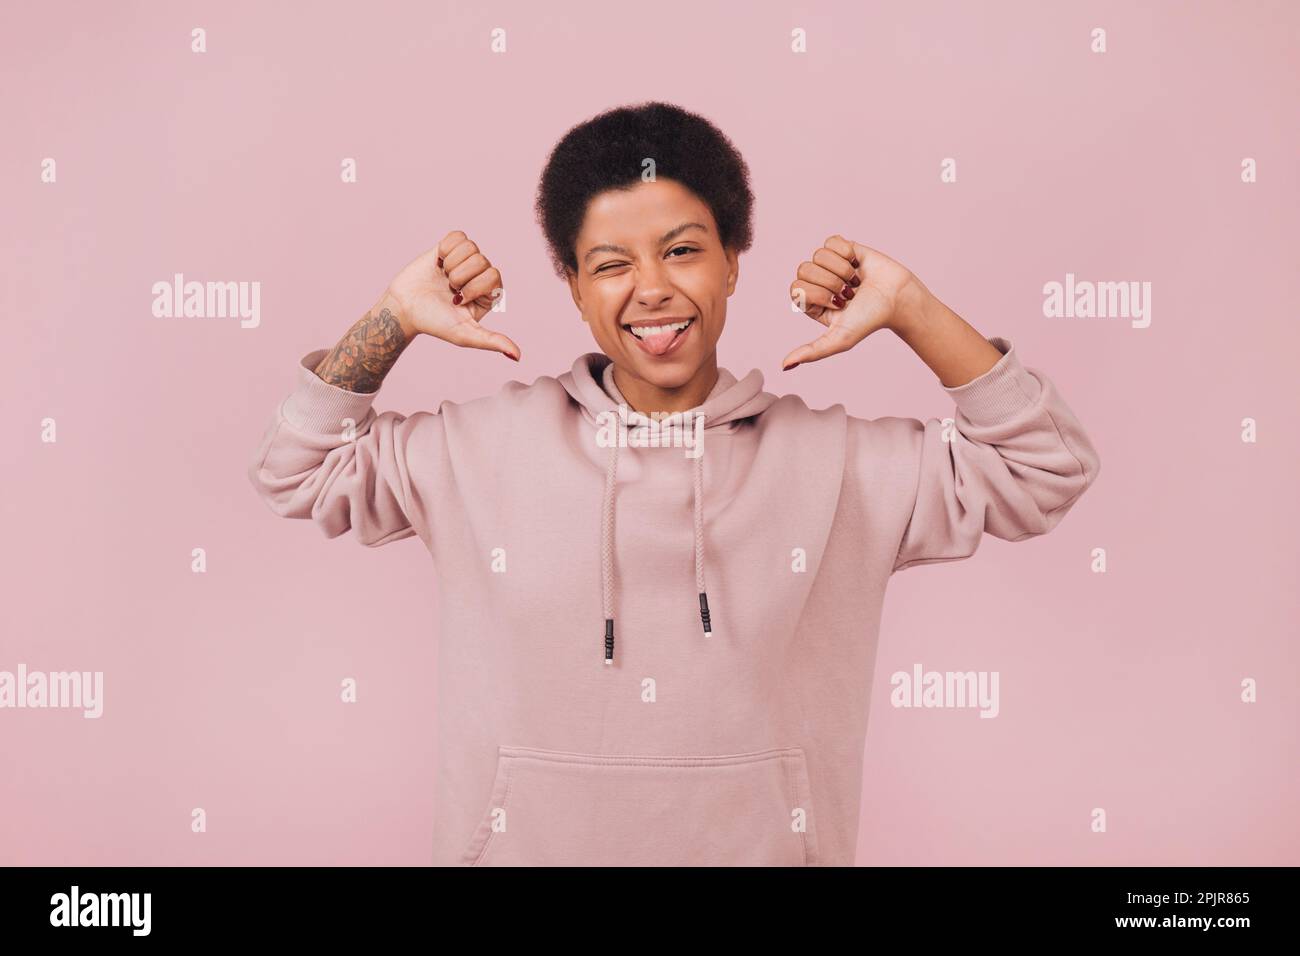 Joyful young black woman winking and showing on herself by thumbs. Cheerful student girl wearing hoodie posing on pink backdrop. Close up portrait Stock Photo